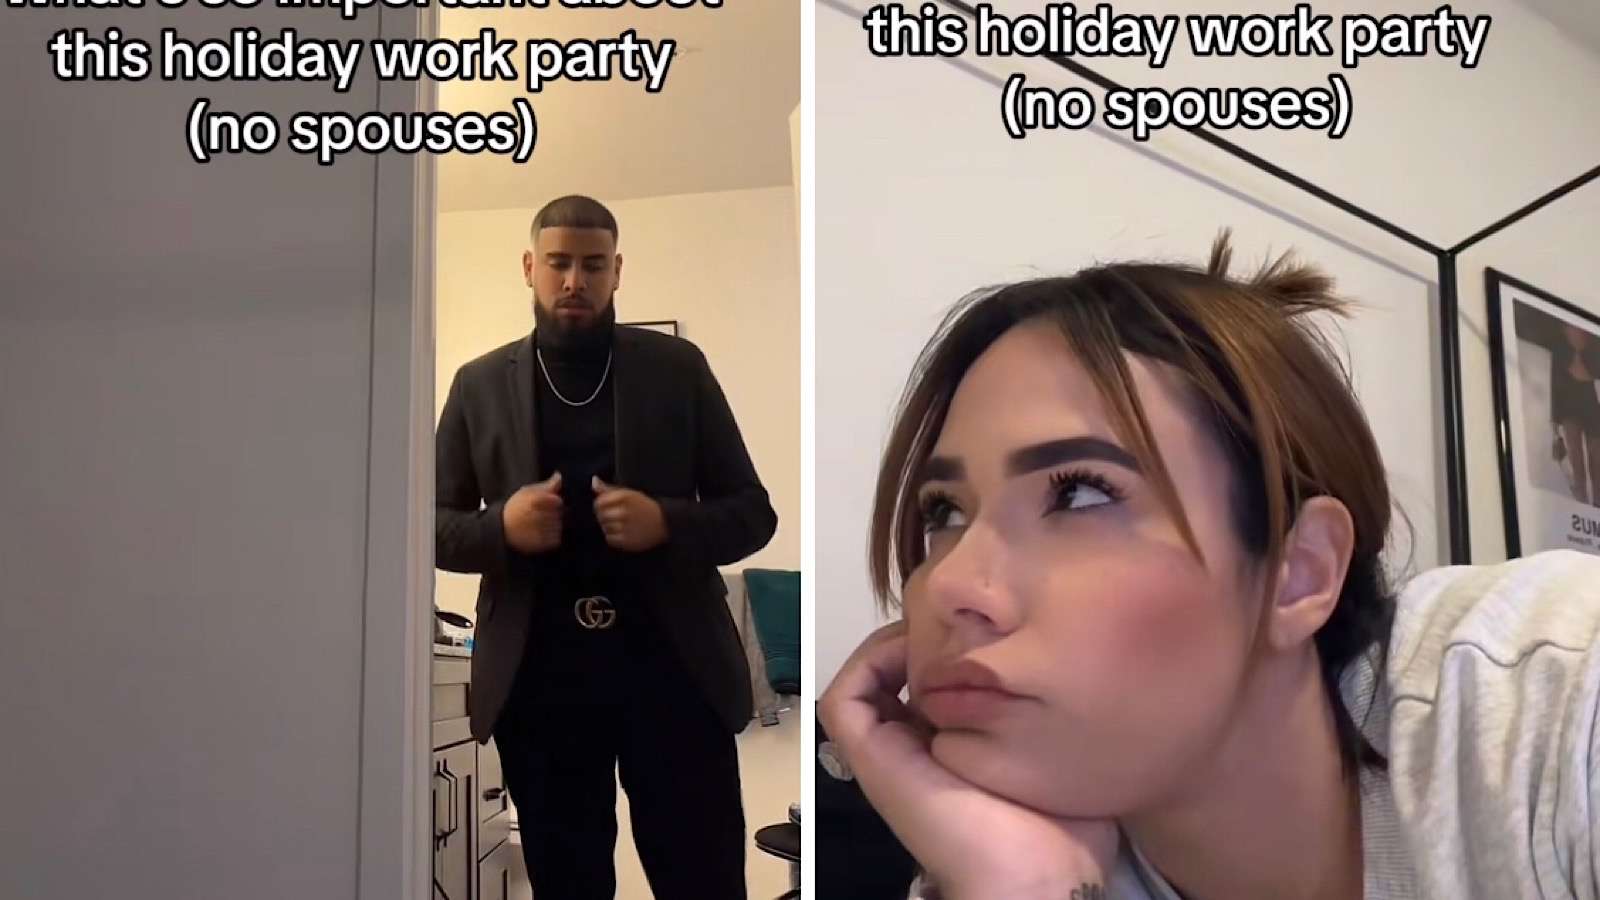 spouses not invited to holiday work party